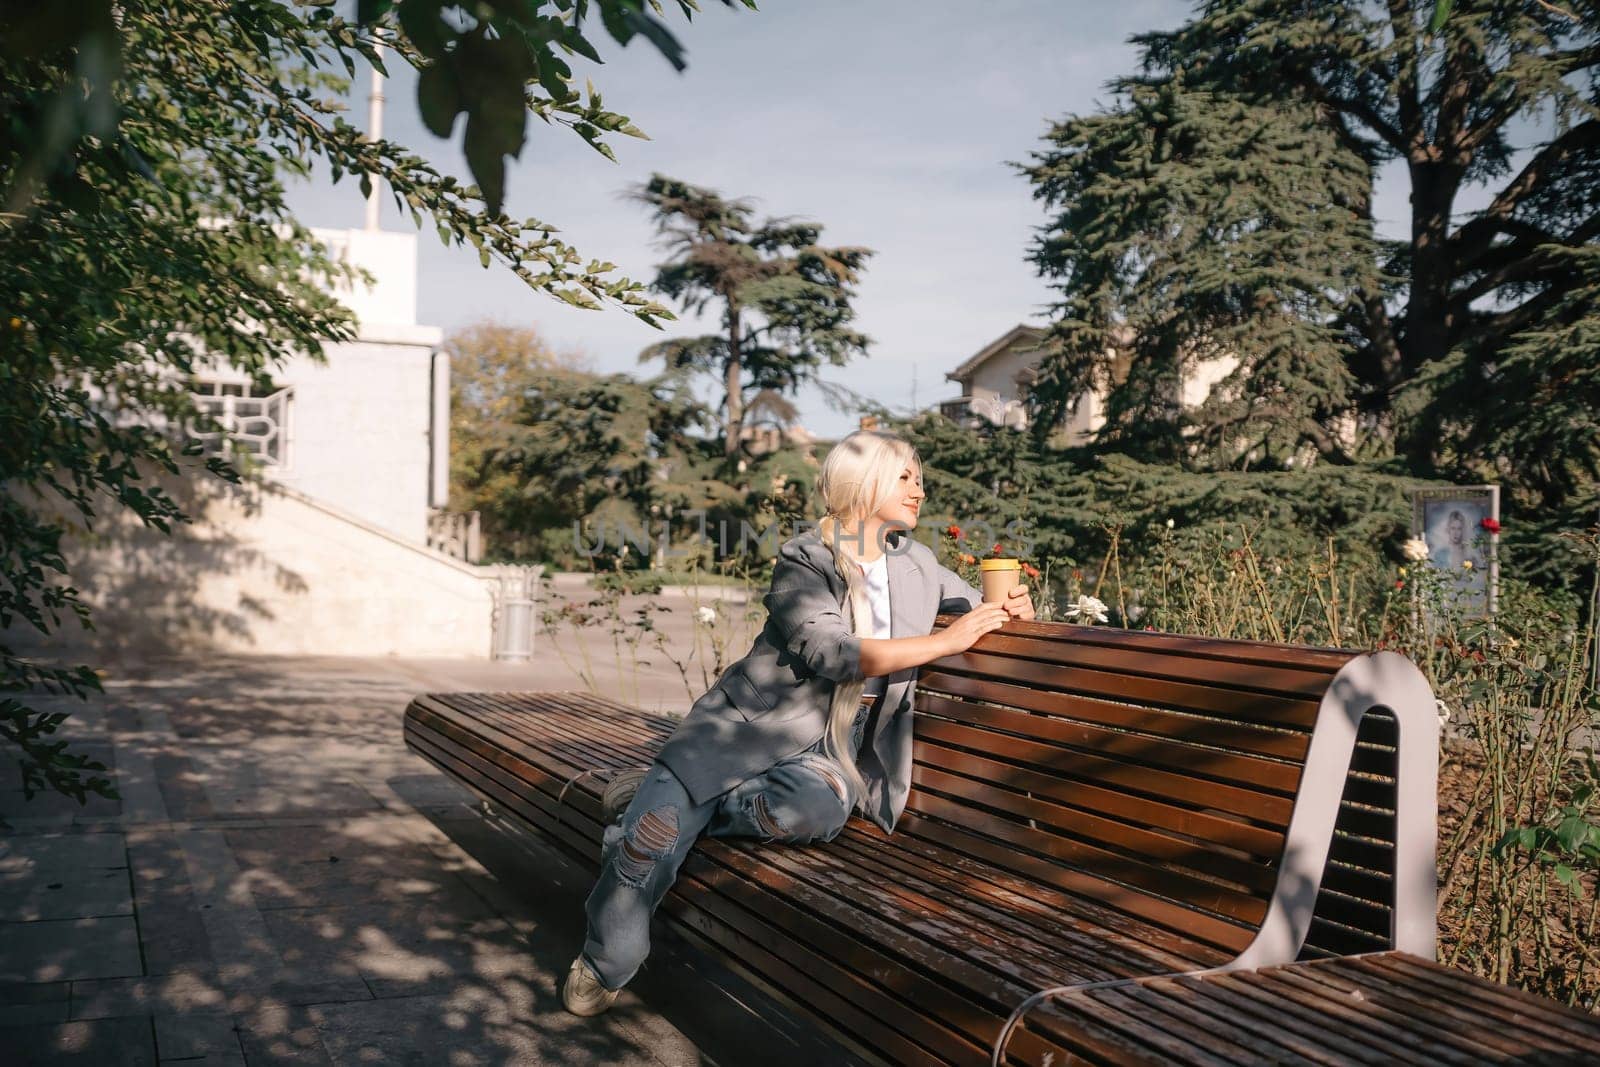 A blonde woman sits on a bench with a cup of coffee in her hand. She is wearing a gray jacket and jeans. The bench is wooden and has a curved back. The scene is peaceful and relaxing. by Matiunina